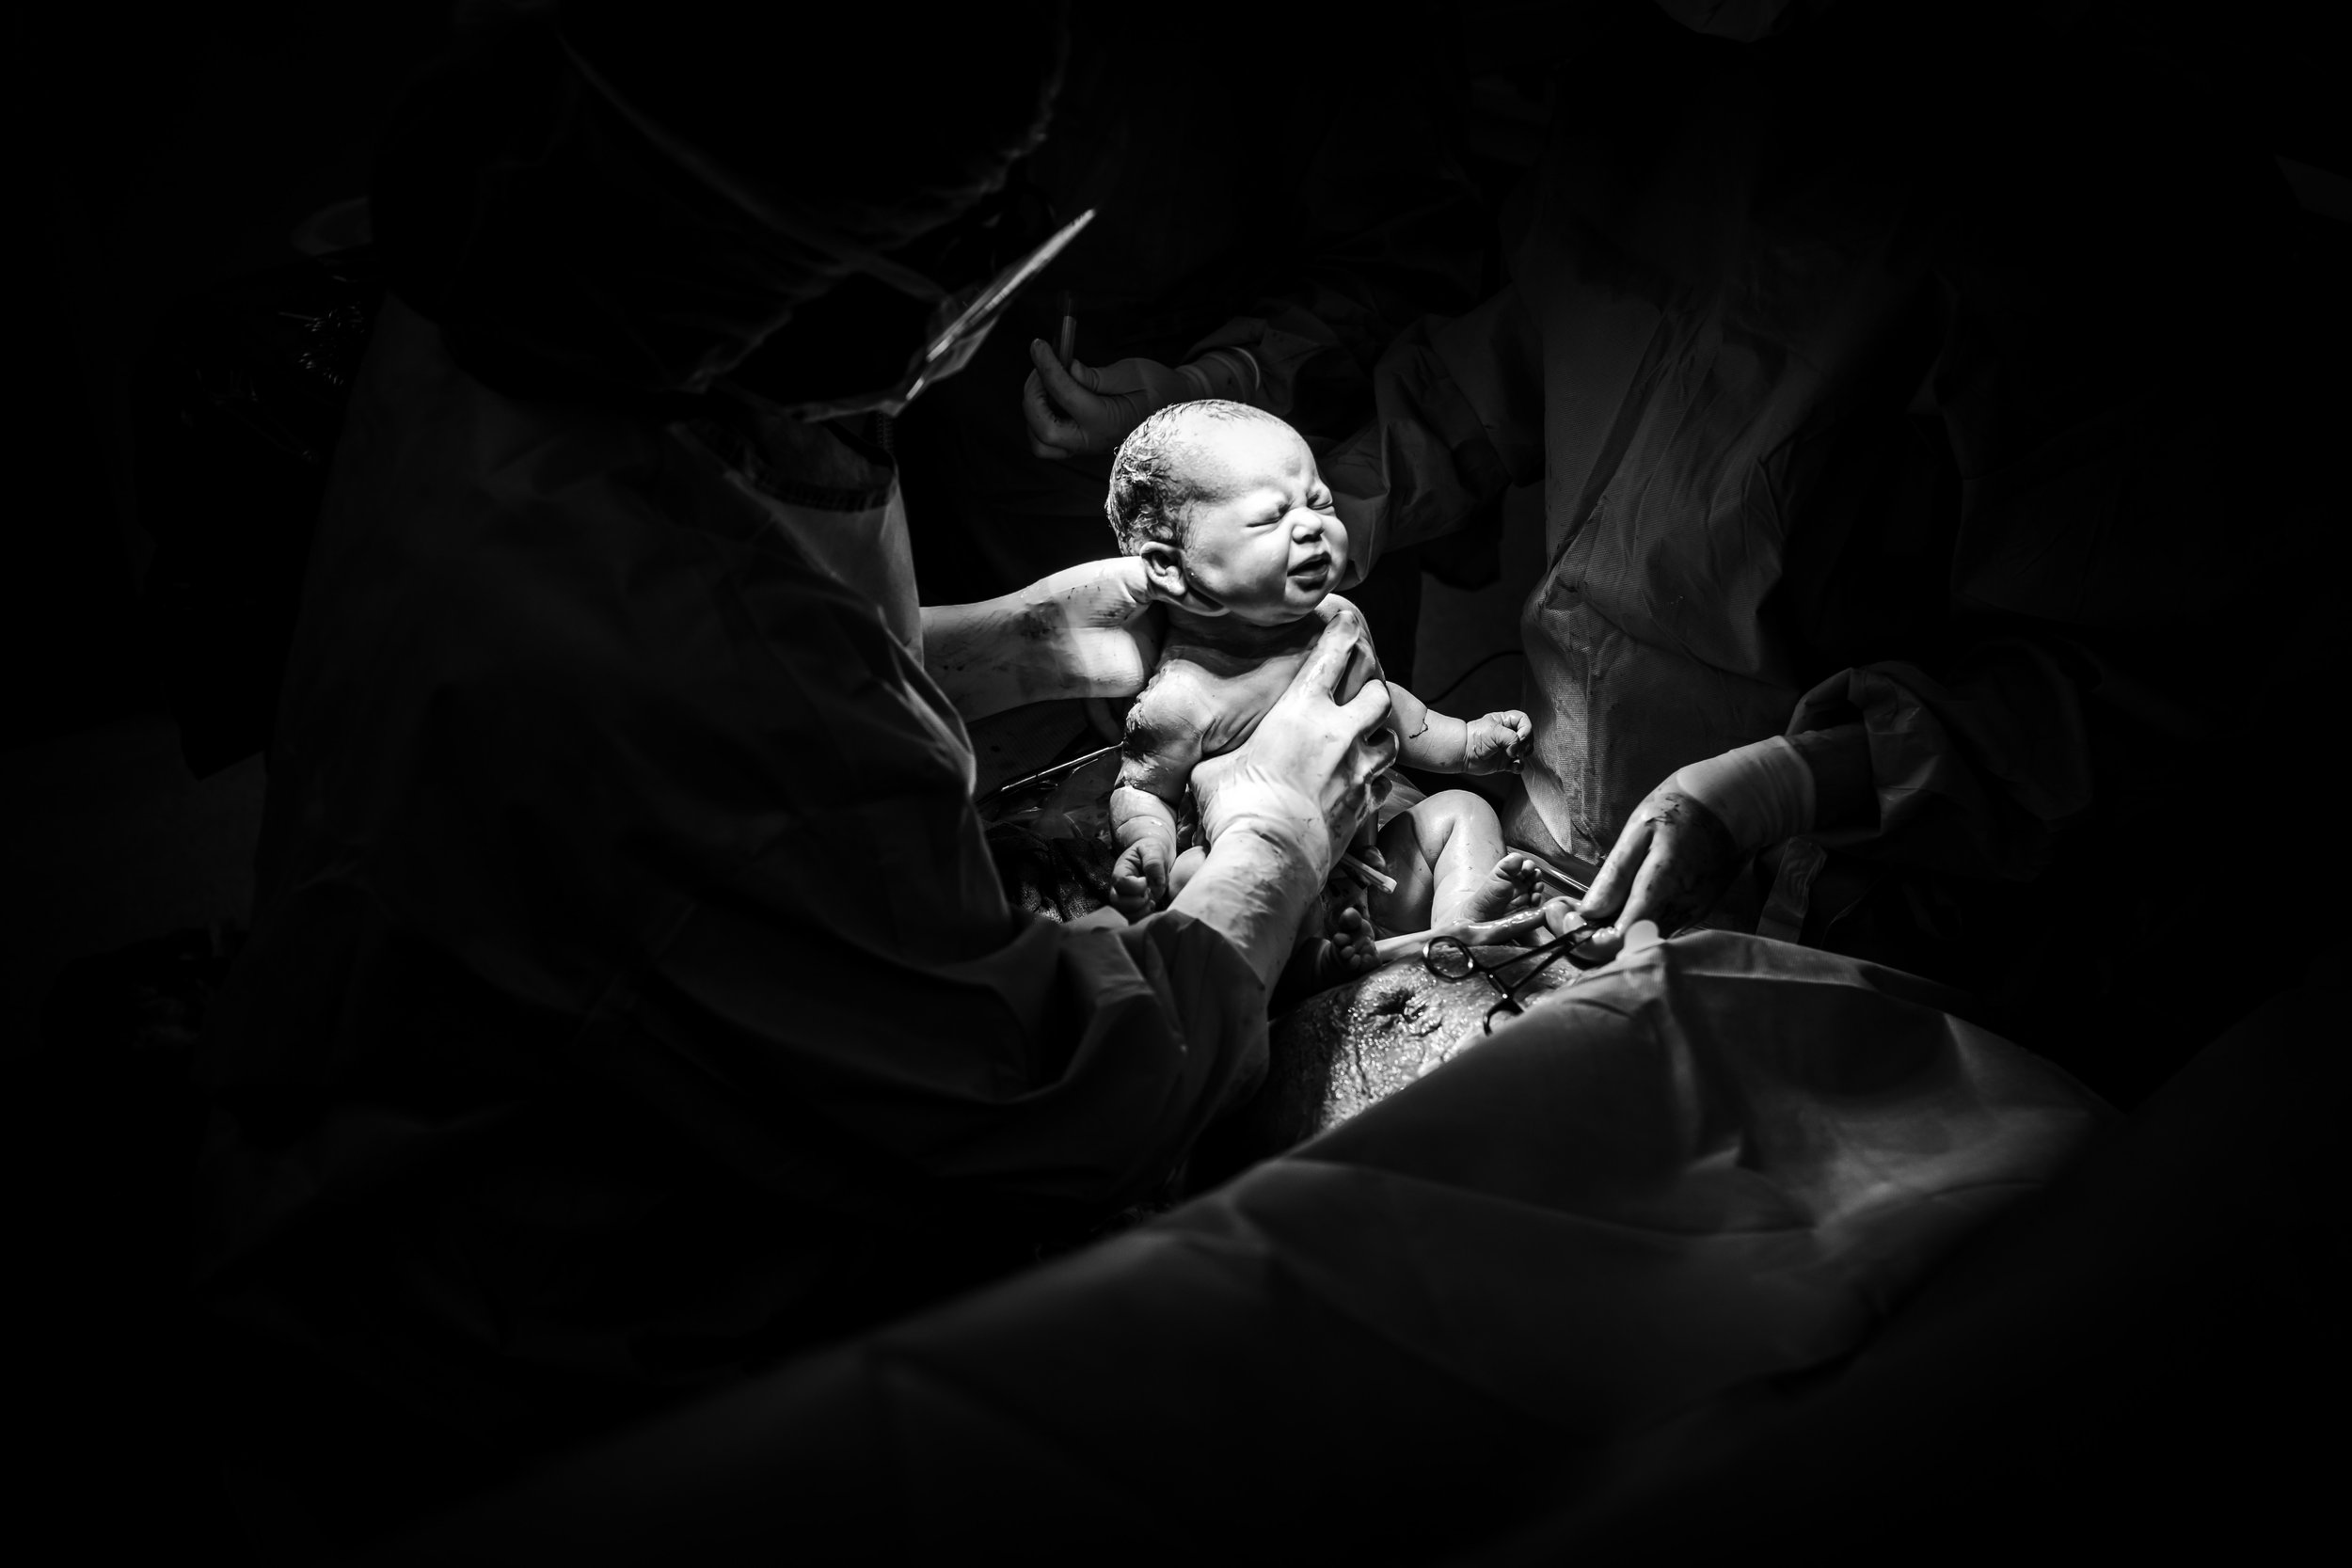 baby is lifted toward light during cesarean birth in Dallas Operating Room